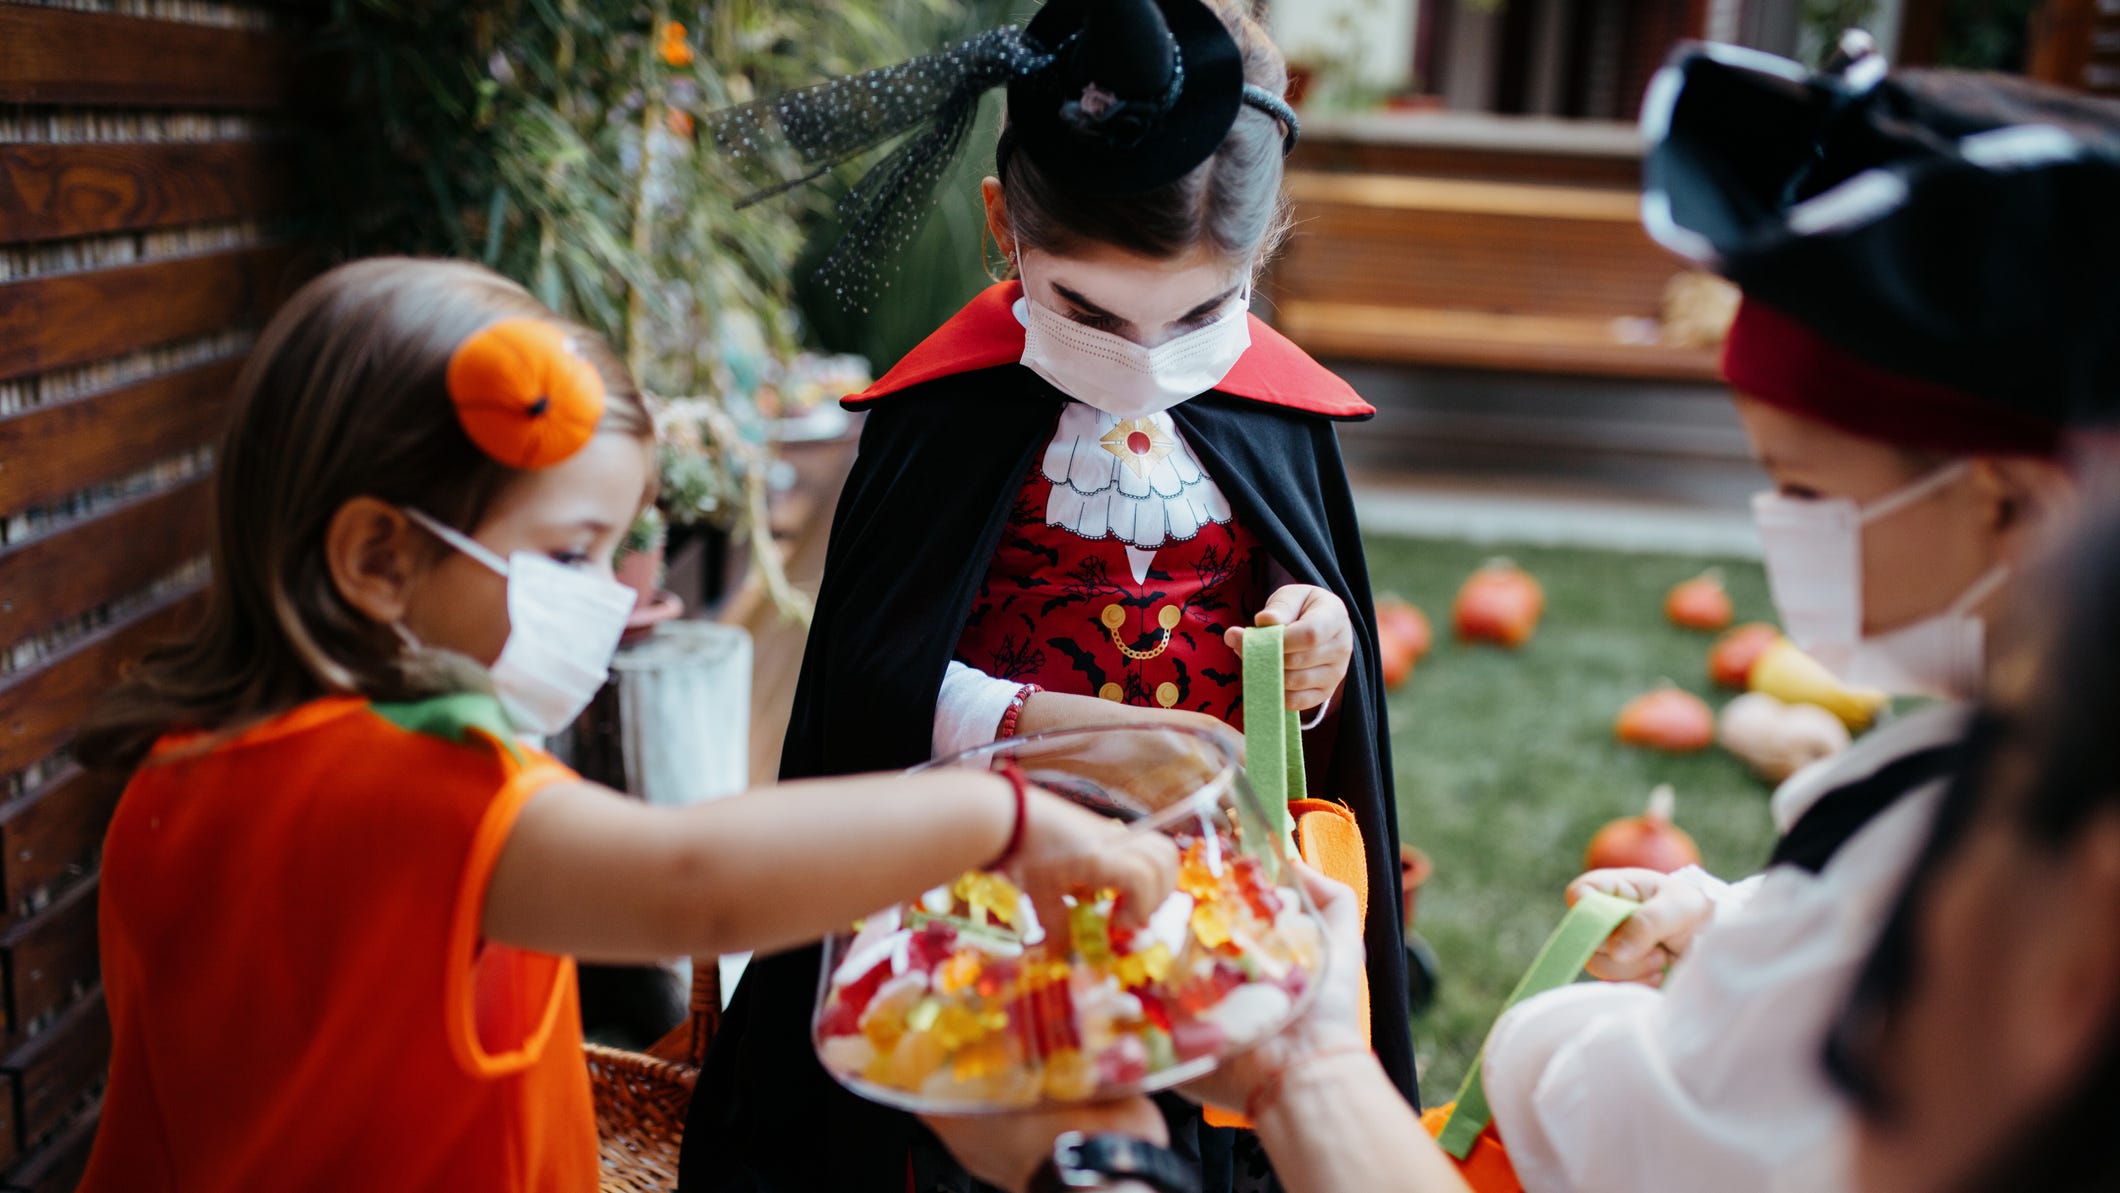 City Of Henderson Issues Guidance For Halloween Trick Or Treating